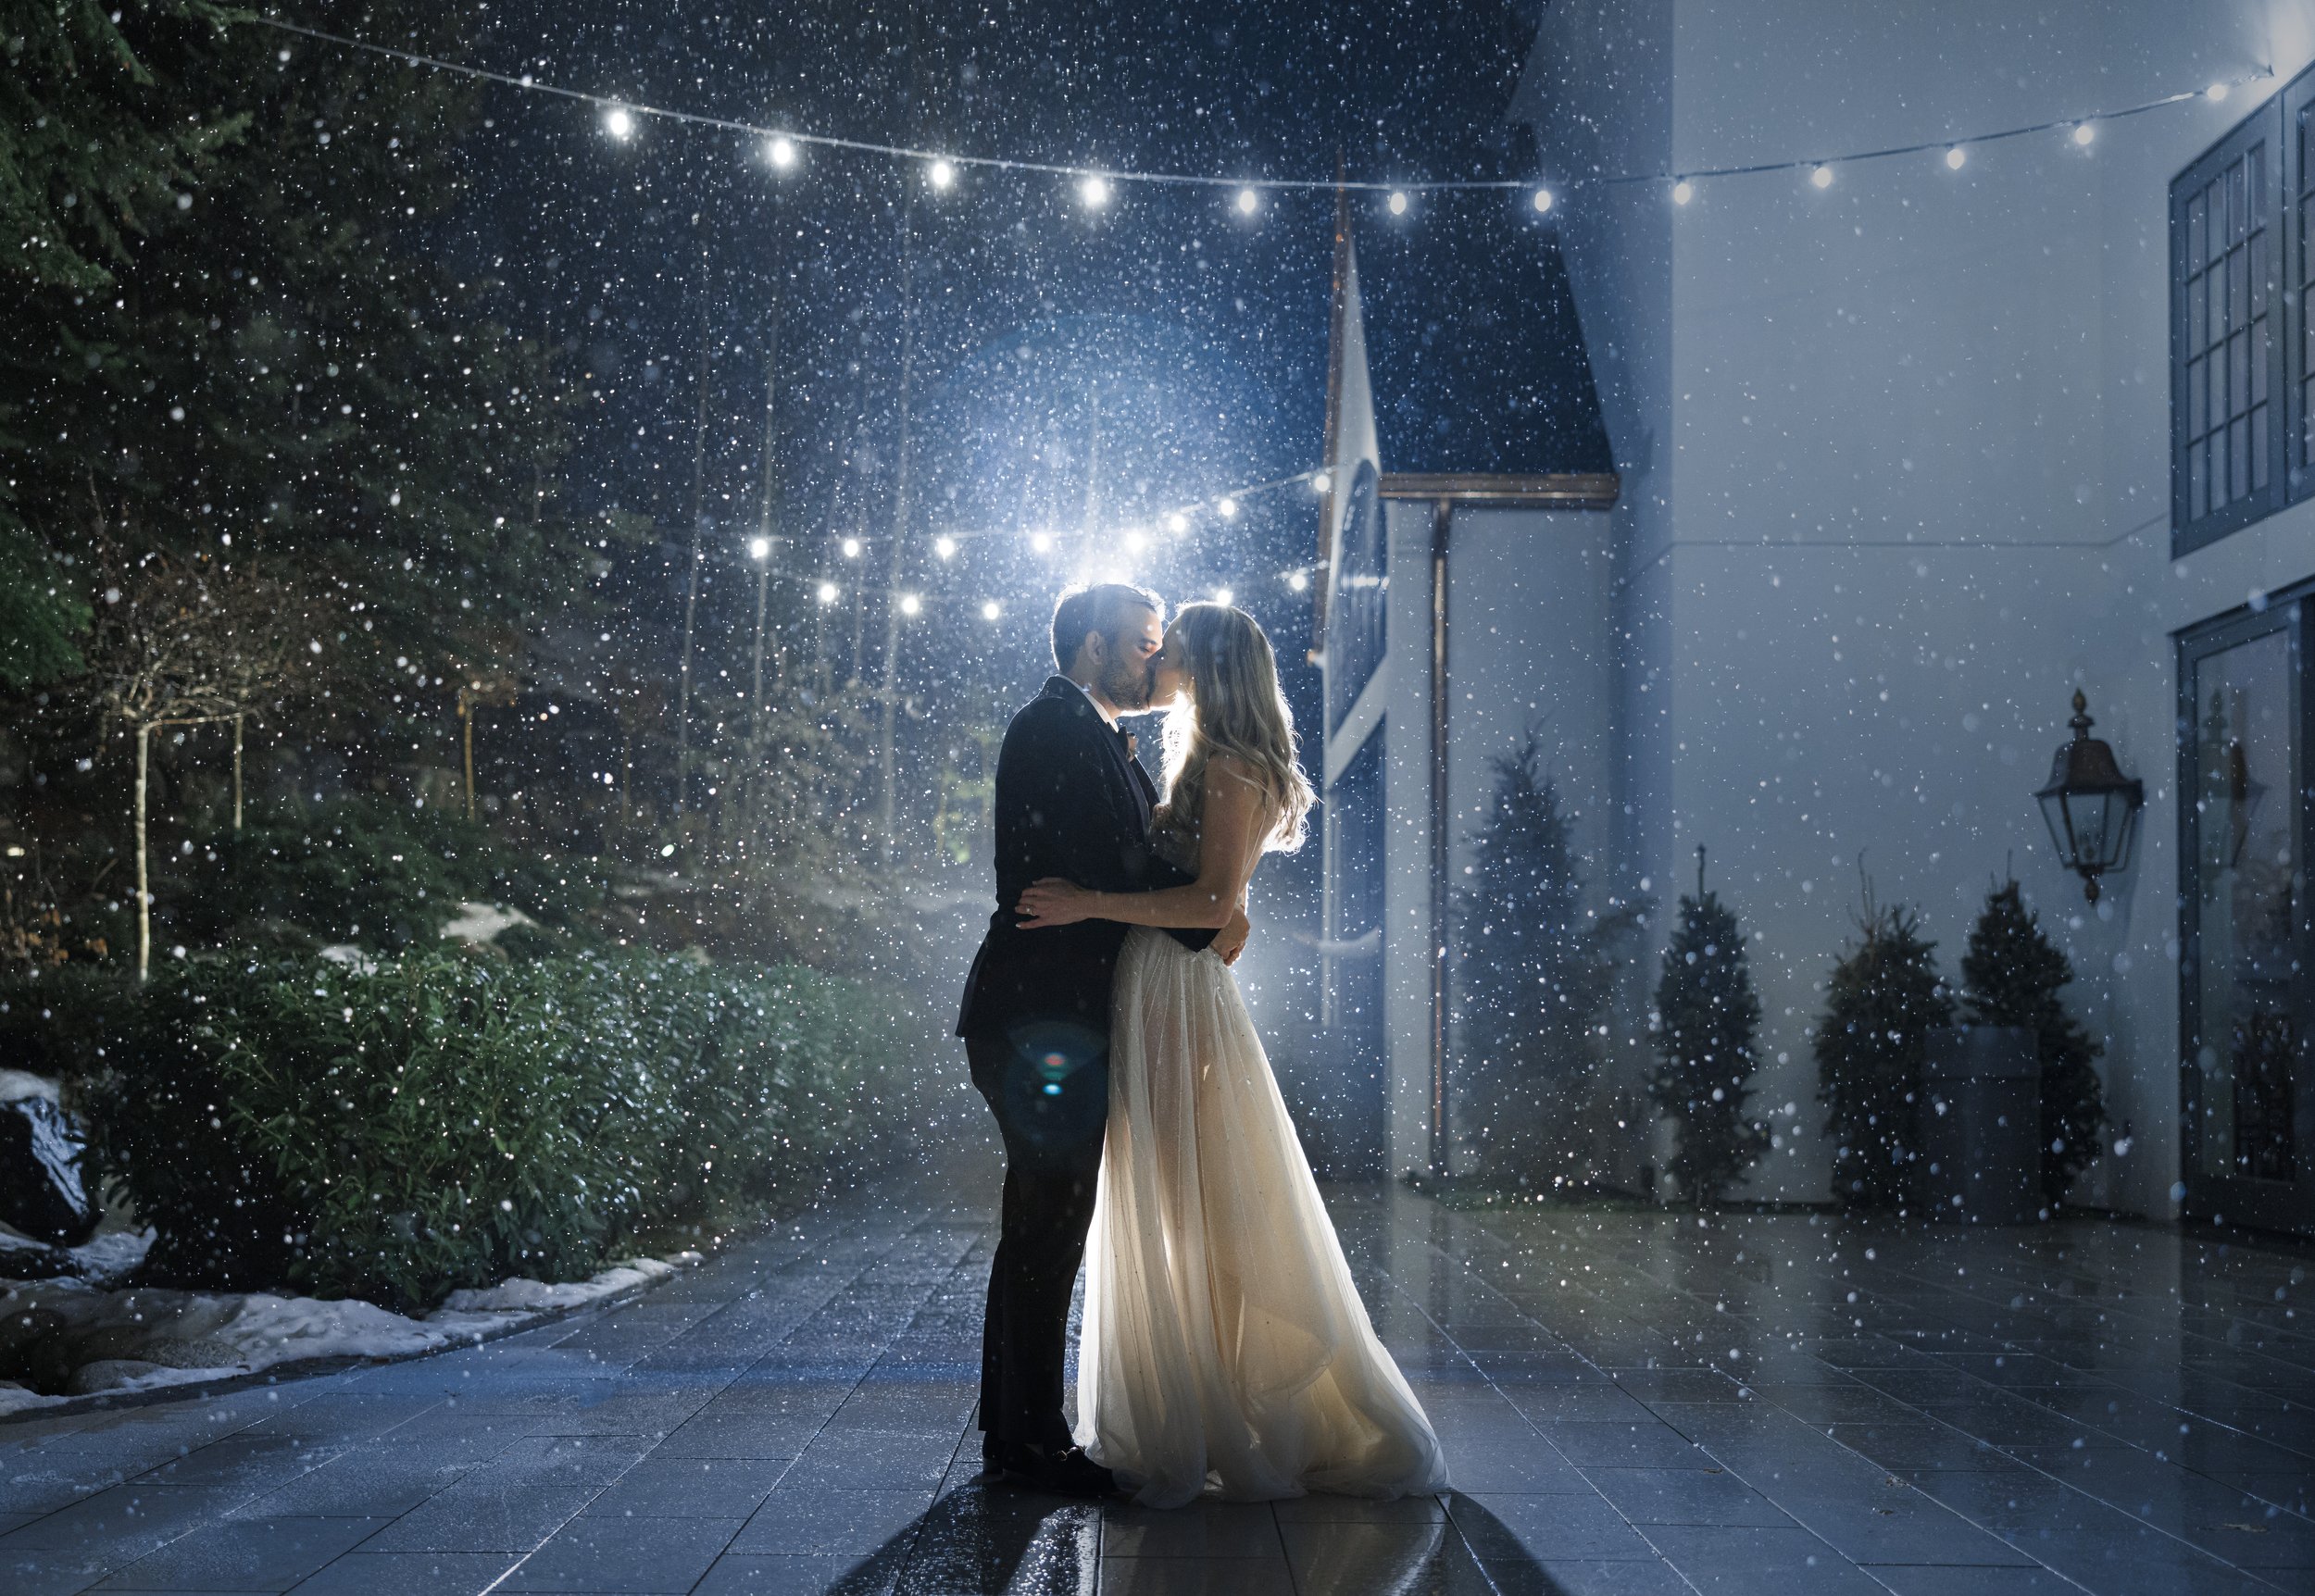  A unique and magical New Years’ Eve Wedding captured by Savanna Richardson Photography. snowy bridal pics #SavannaRichardsonPhotography #SavannaRichardsonWeddings #NYEwedding #magicalwedding #snowywedding #holidaywedding #married 